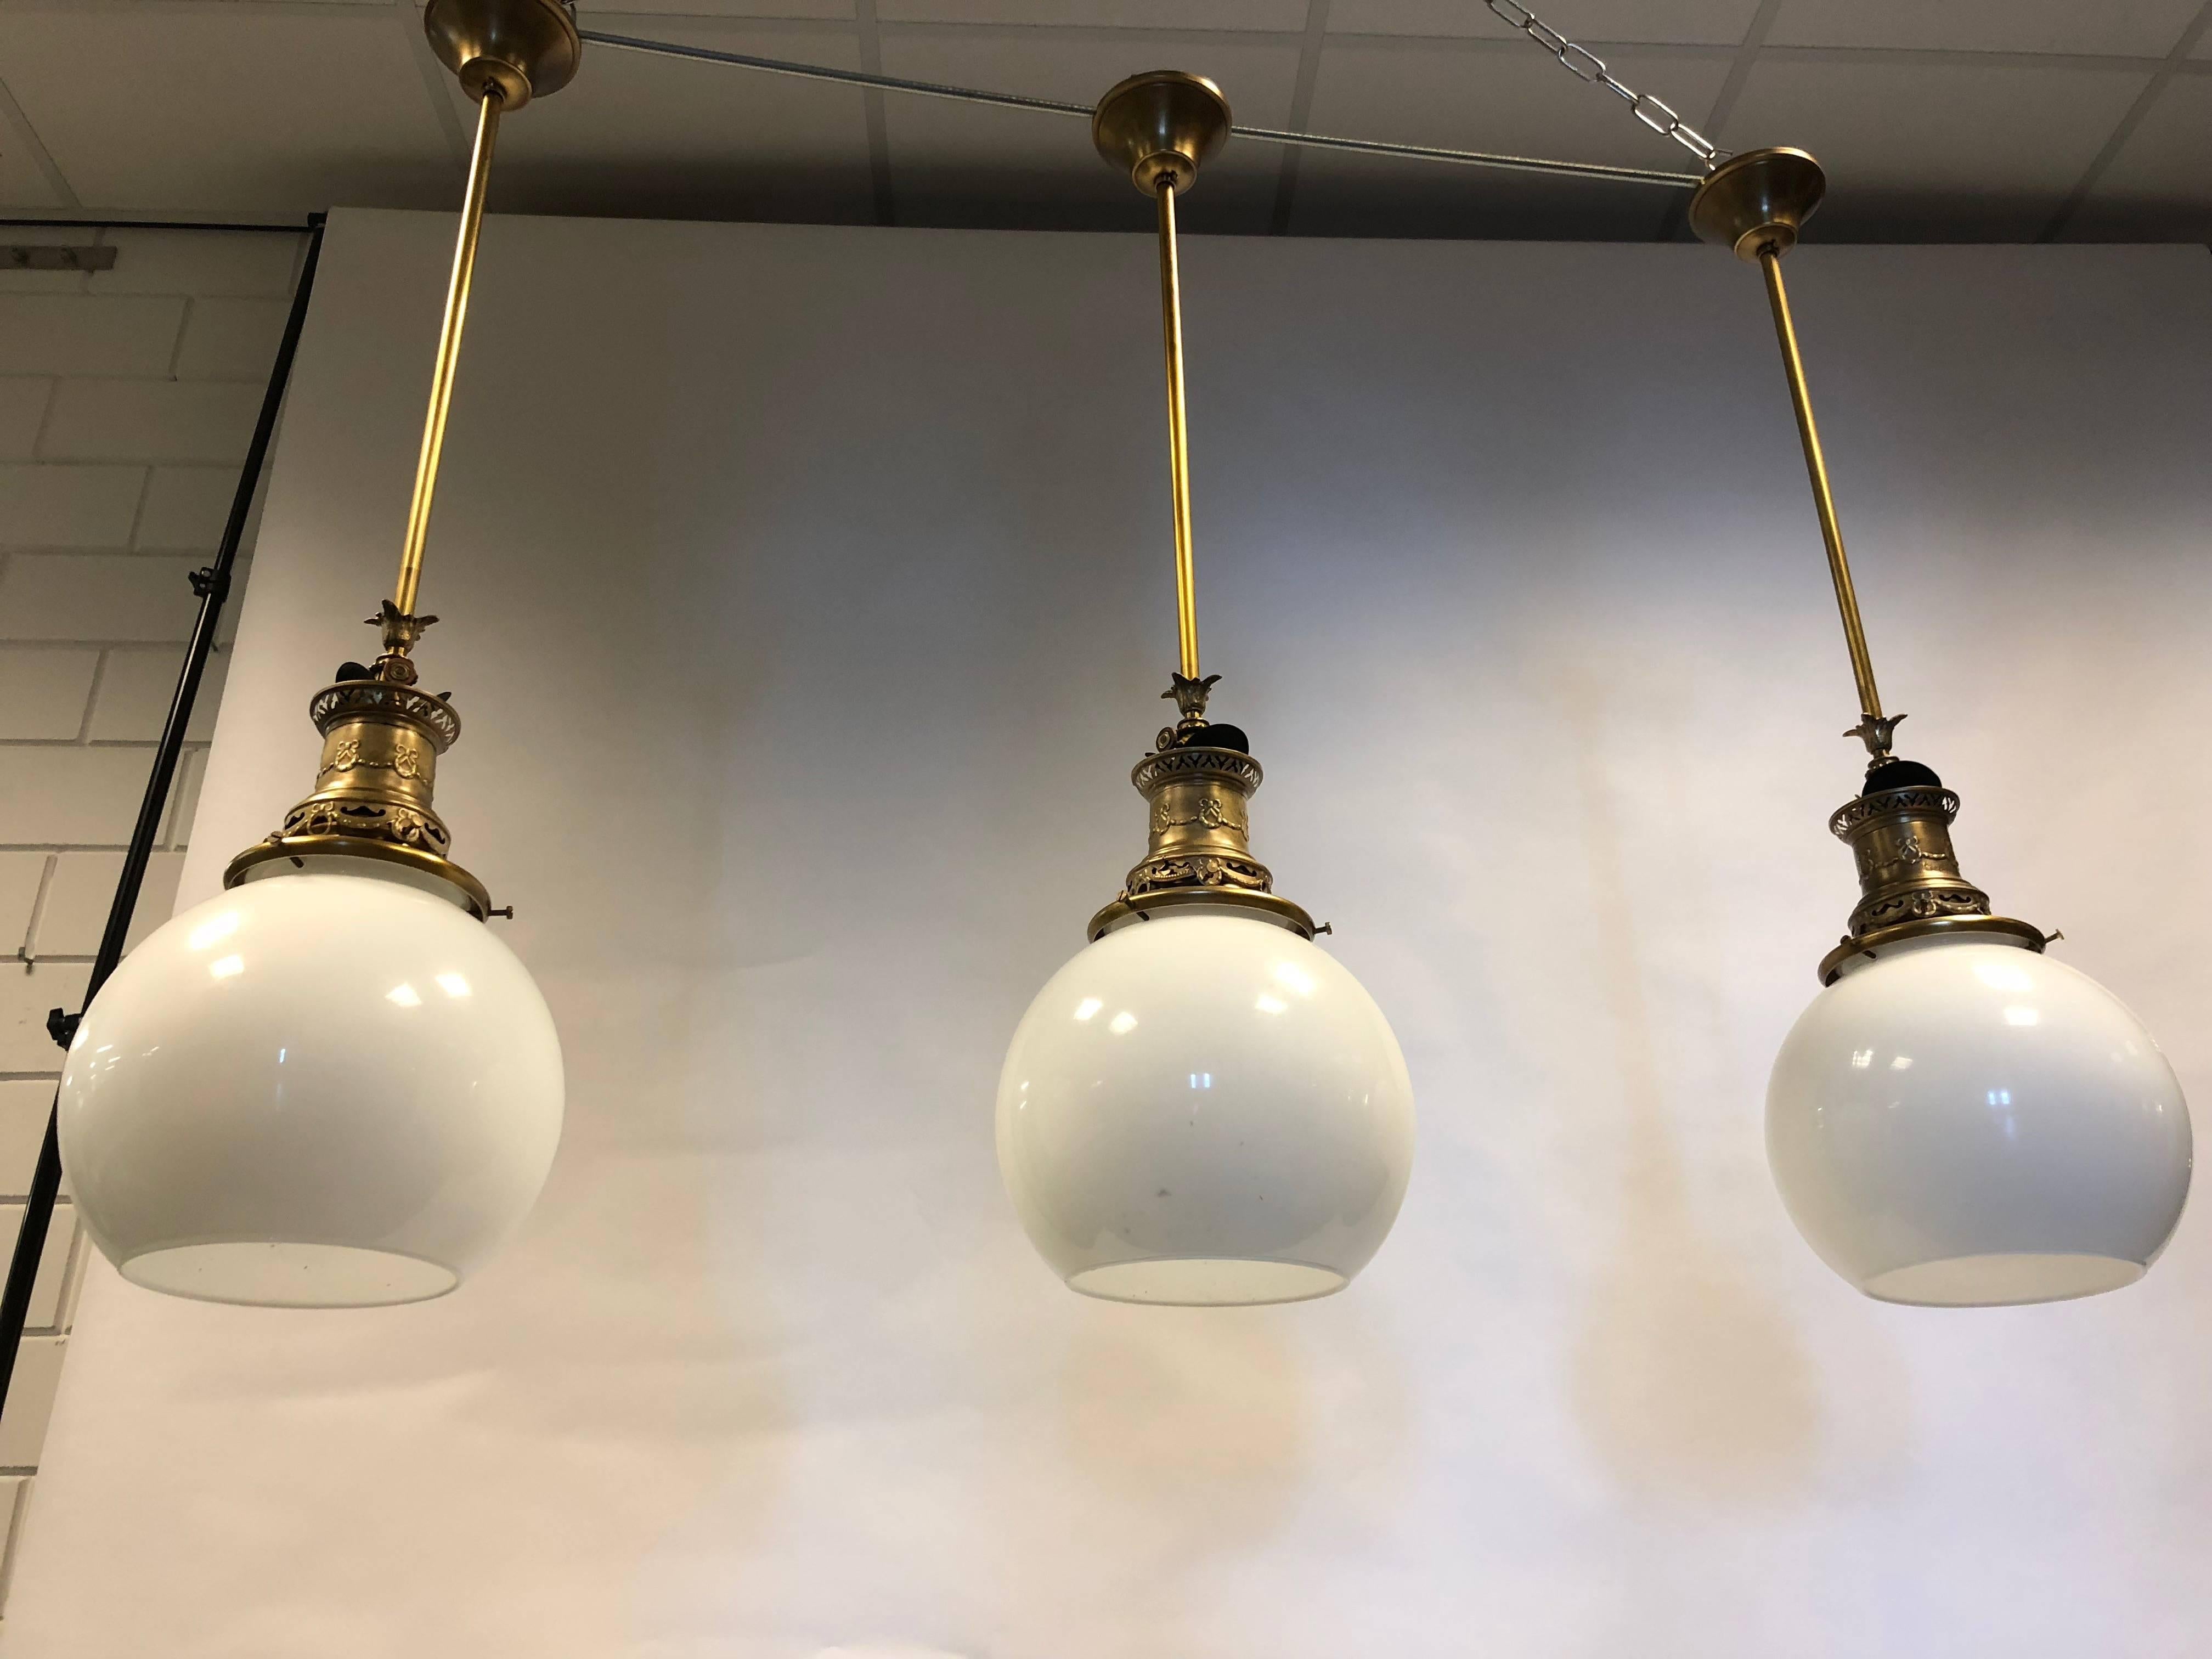 This unique 19th century antique gas pendant, 1860-1880 from France is recently restored.
These pendants were rewired 220V.